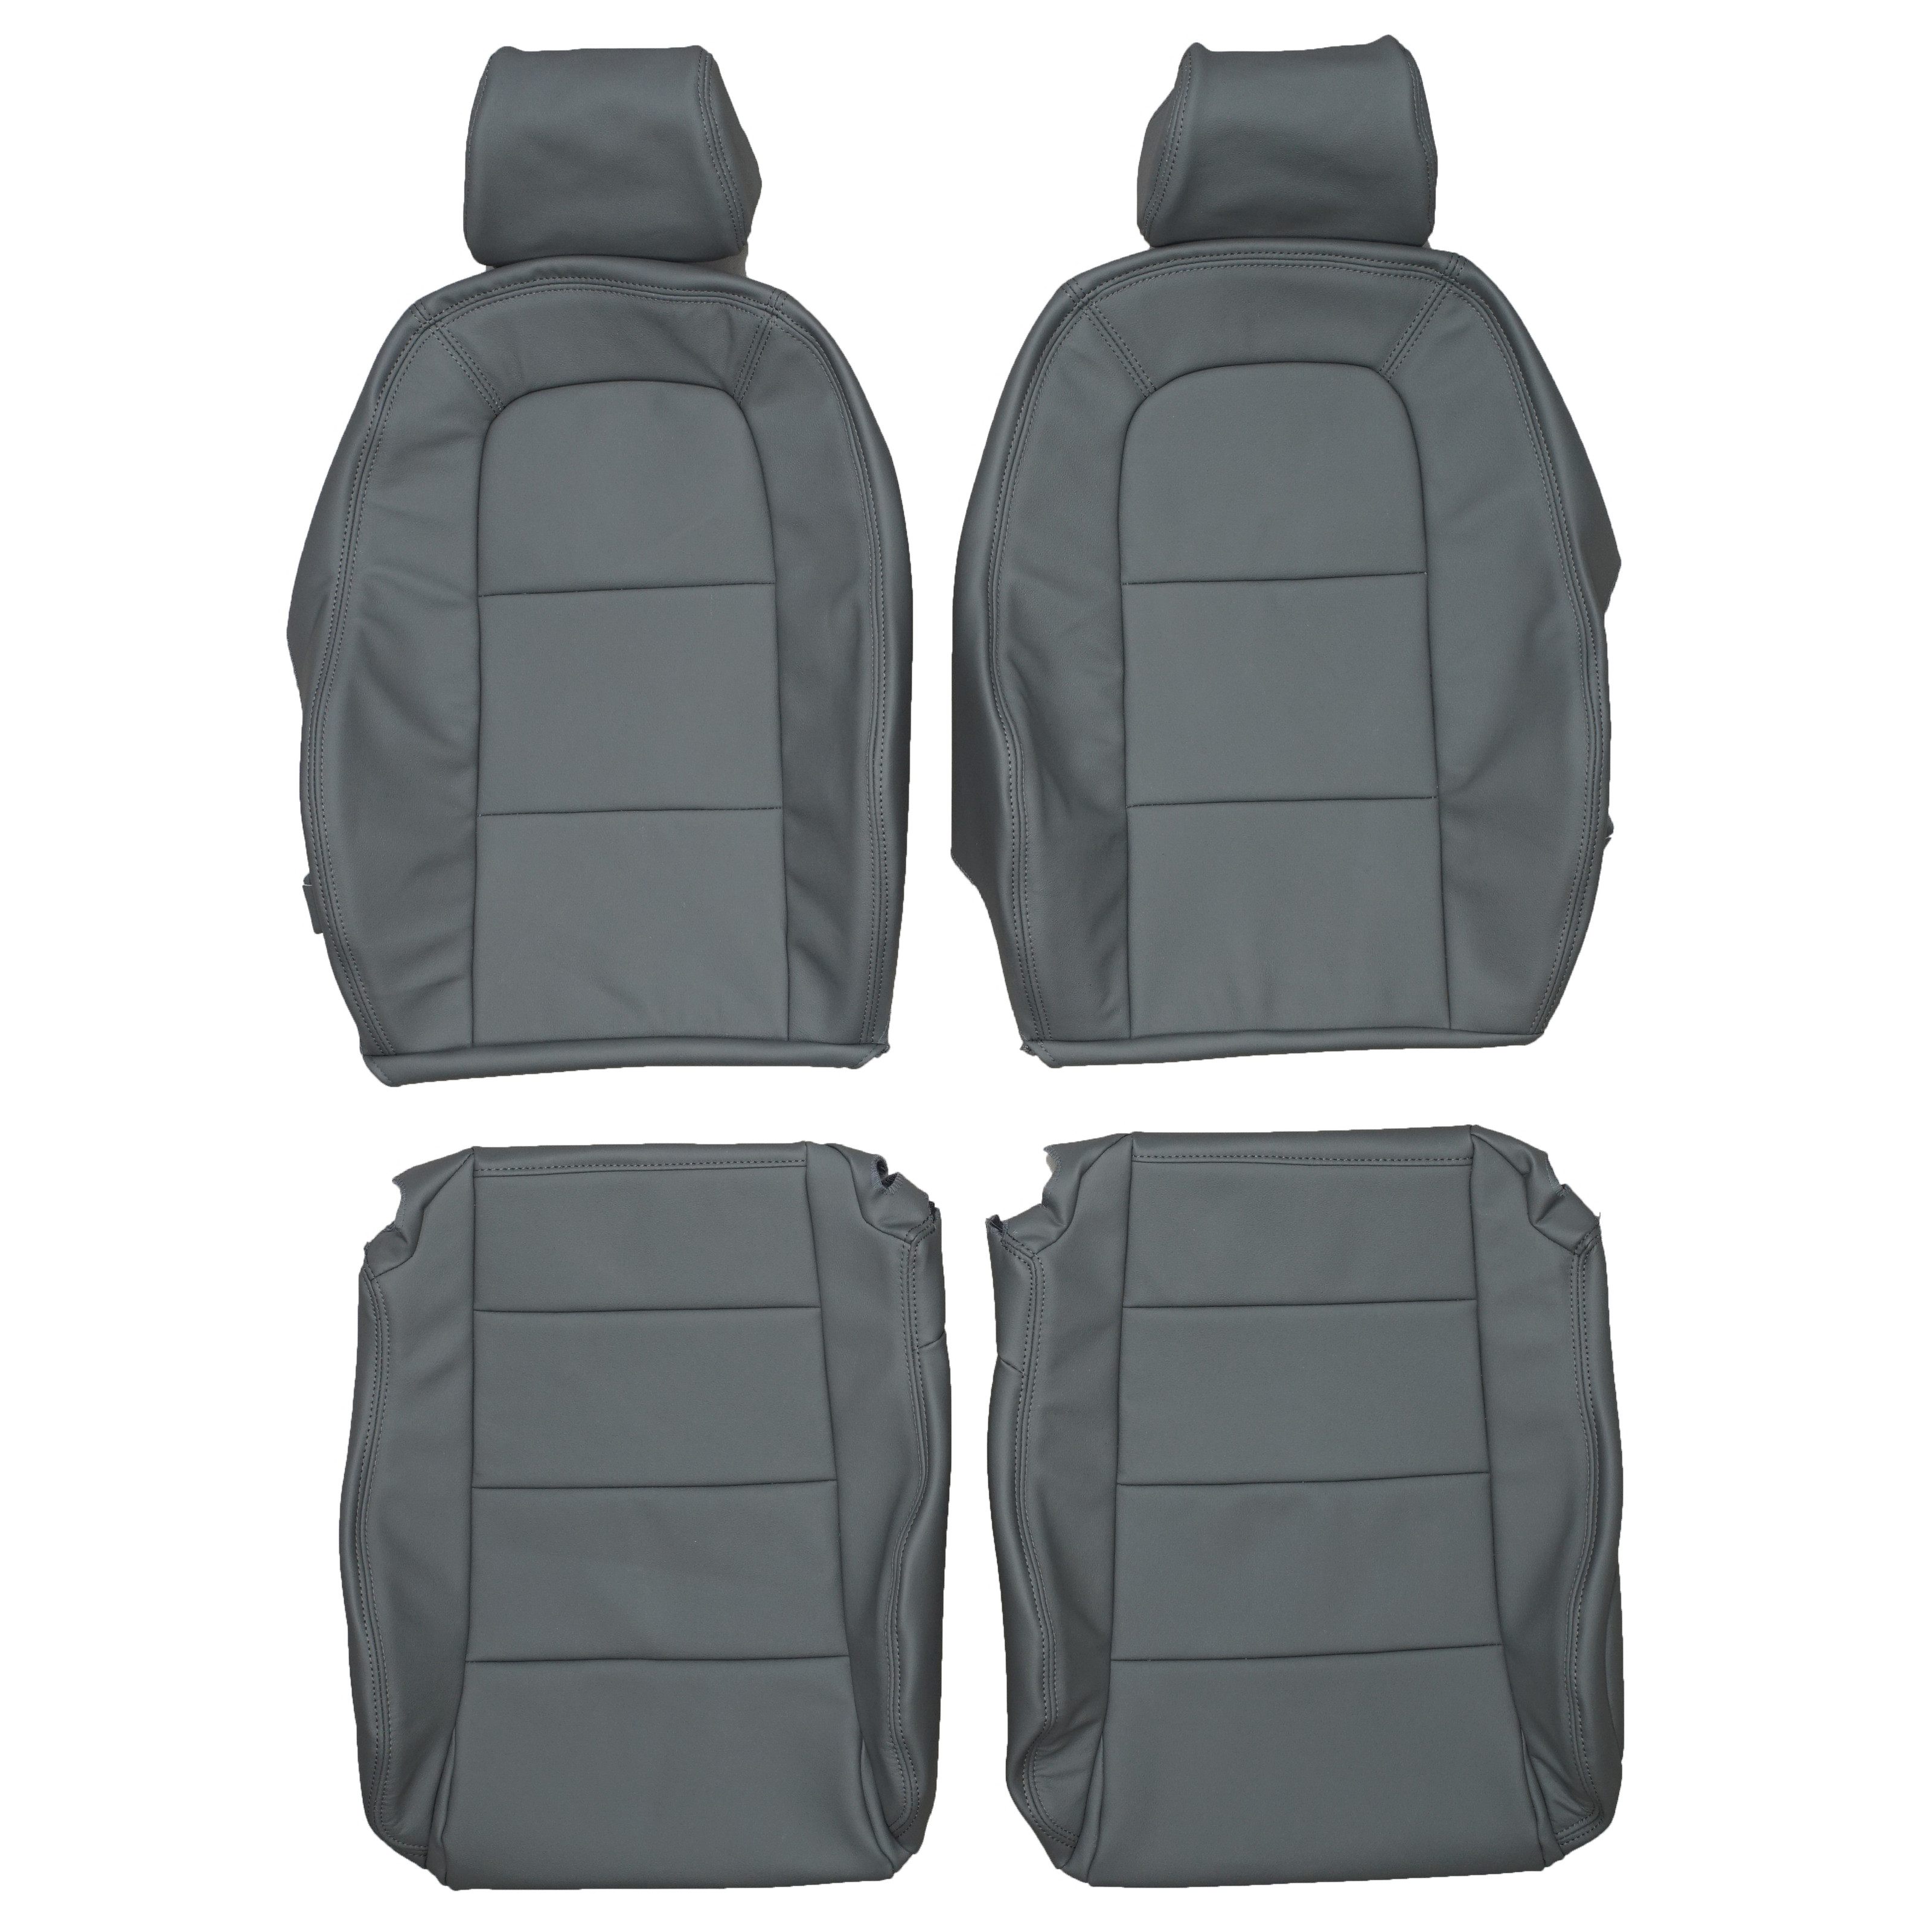 1998-2006 Audi TT MK1 Custom Real Leather Seat Covers (Front) - Lseat.com